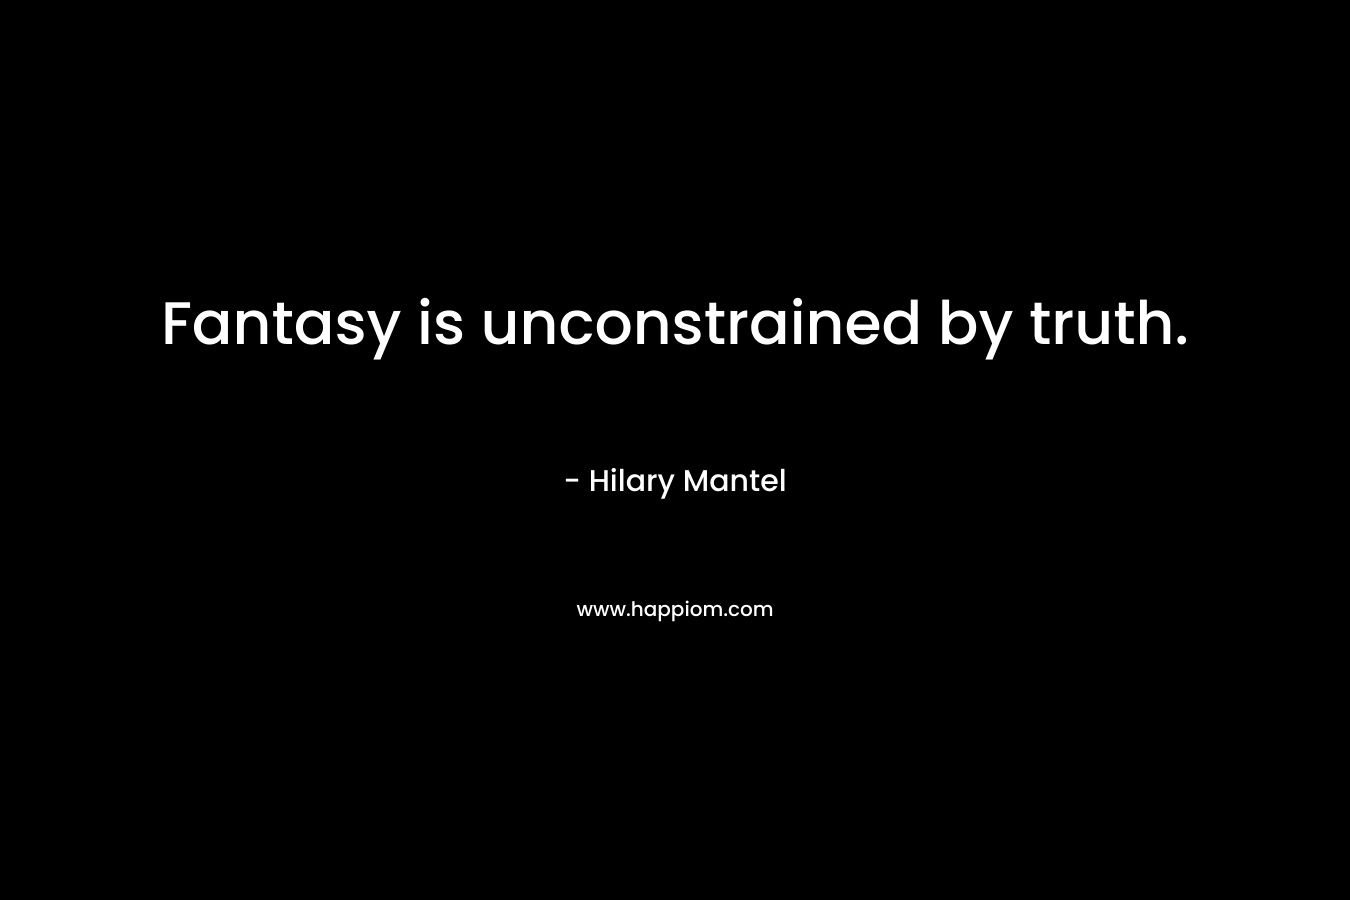 Fantasy is unconstrained by truth.